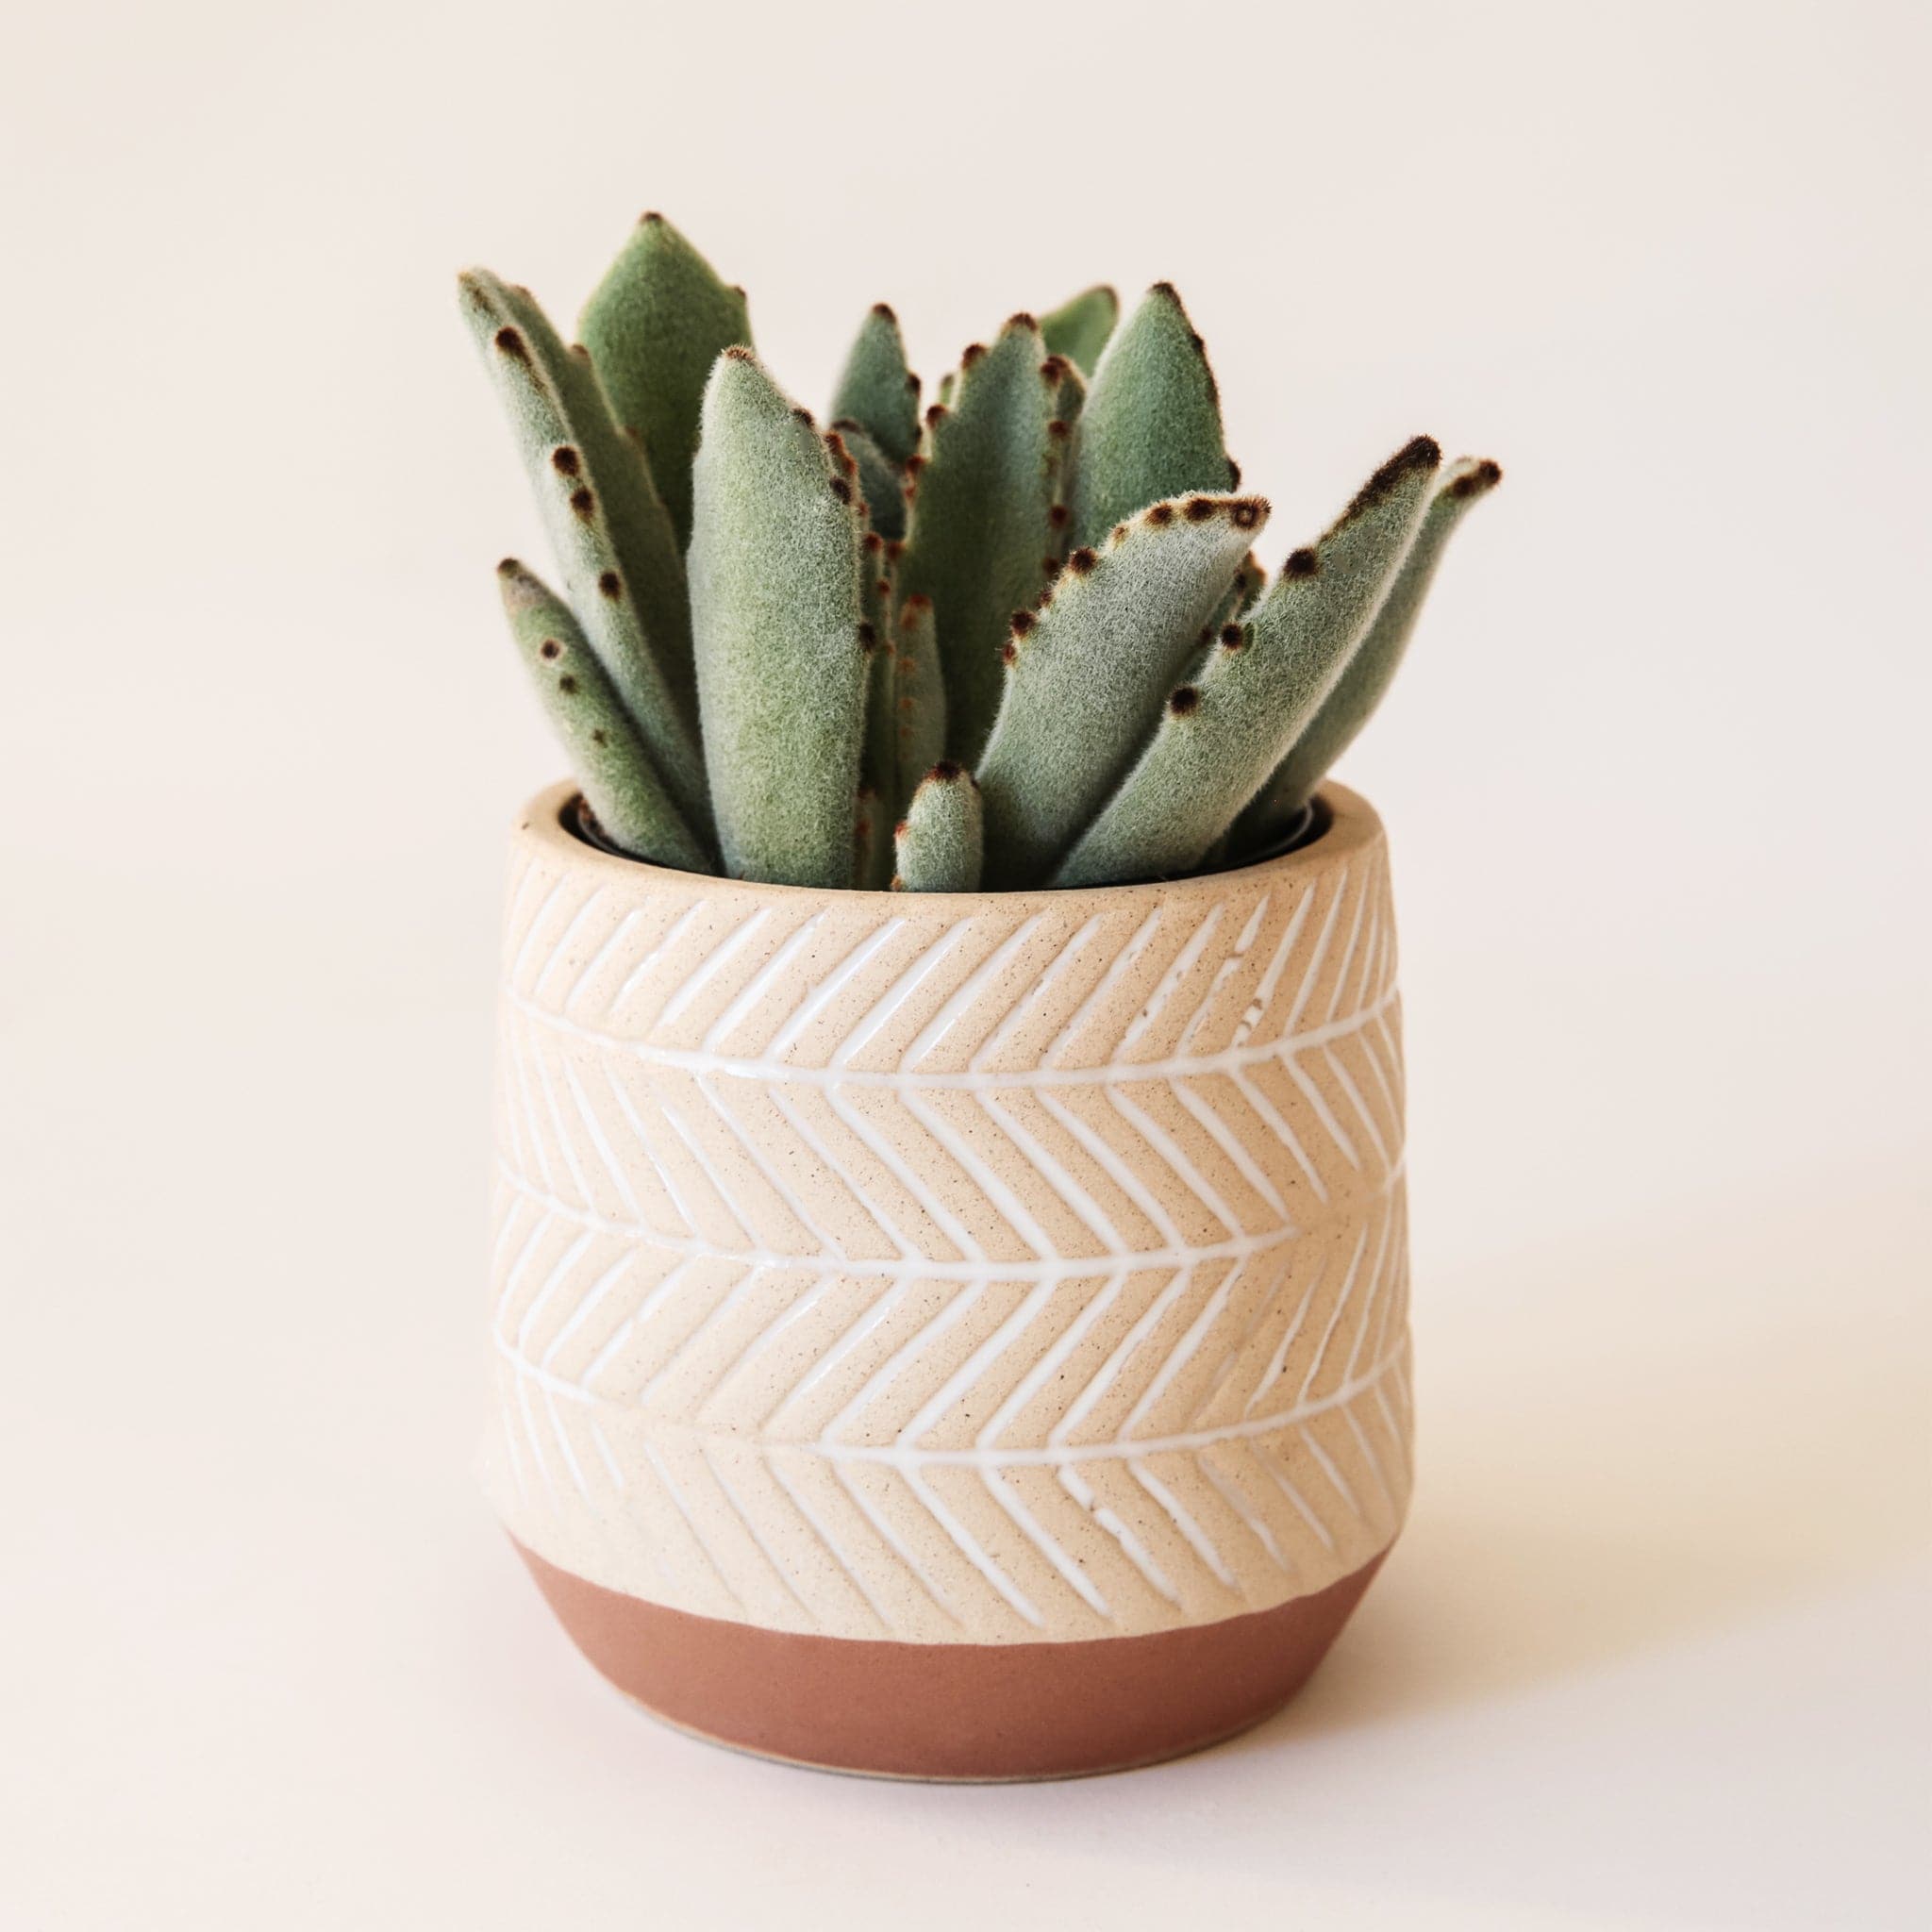 A pot where the top tapers, then widens, then tapers at the bottom. The bottom of the vessel is a dark tan while the top color is lighter with white imprinted zig zag designs.